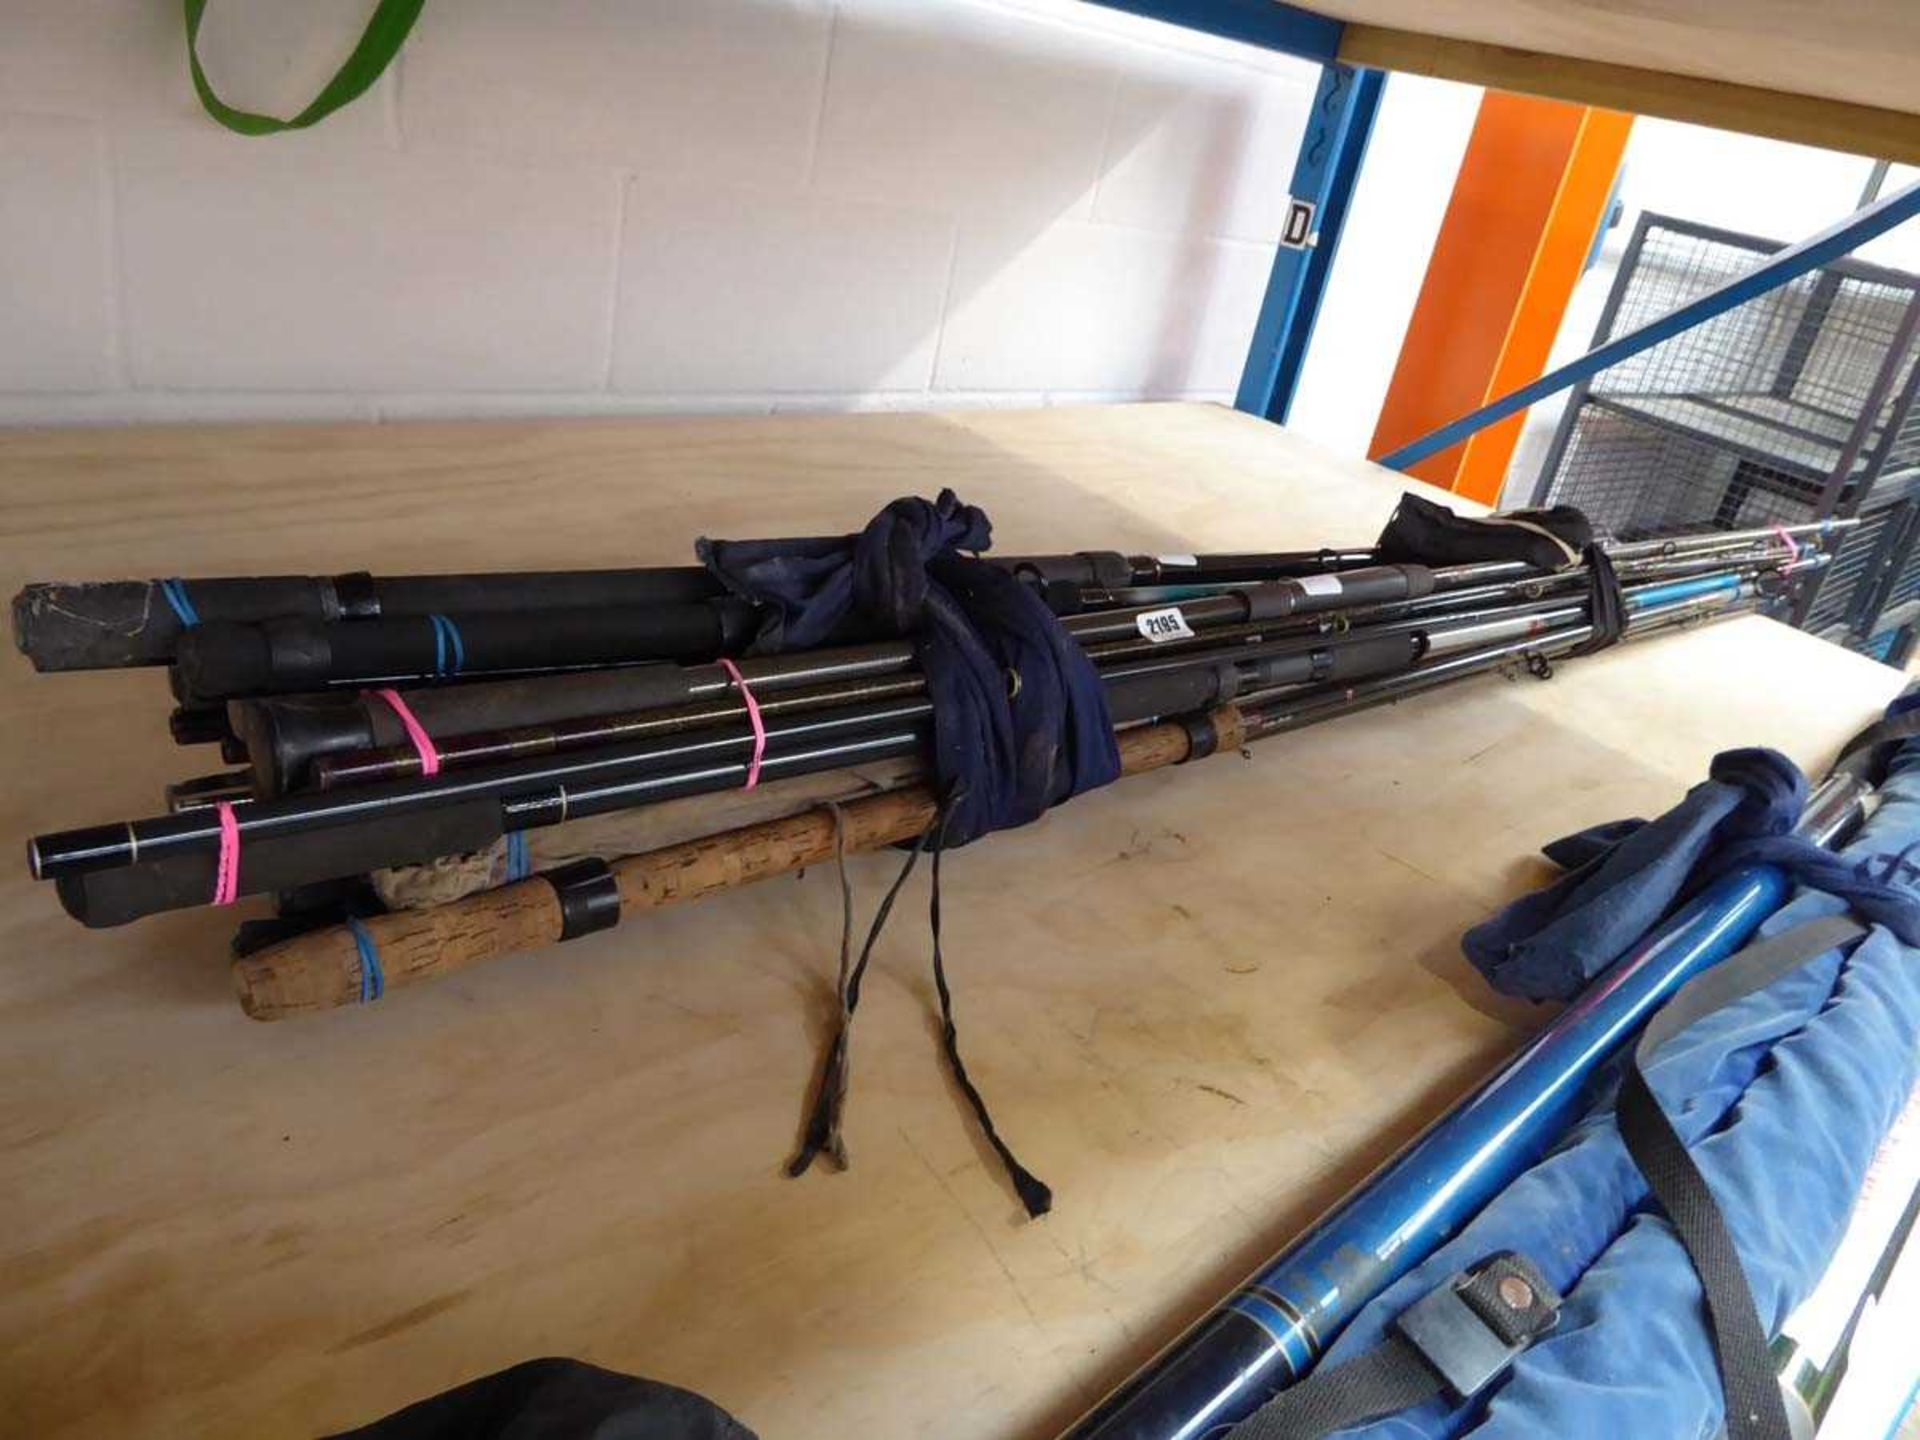 Bundle of float and feeder rods